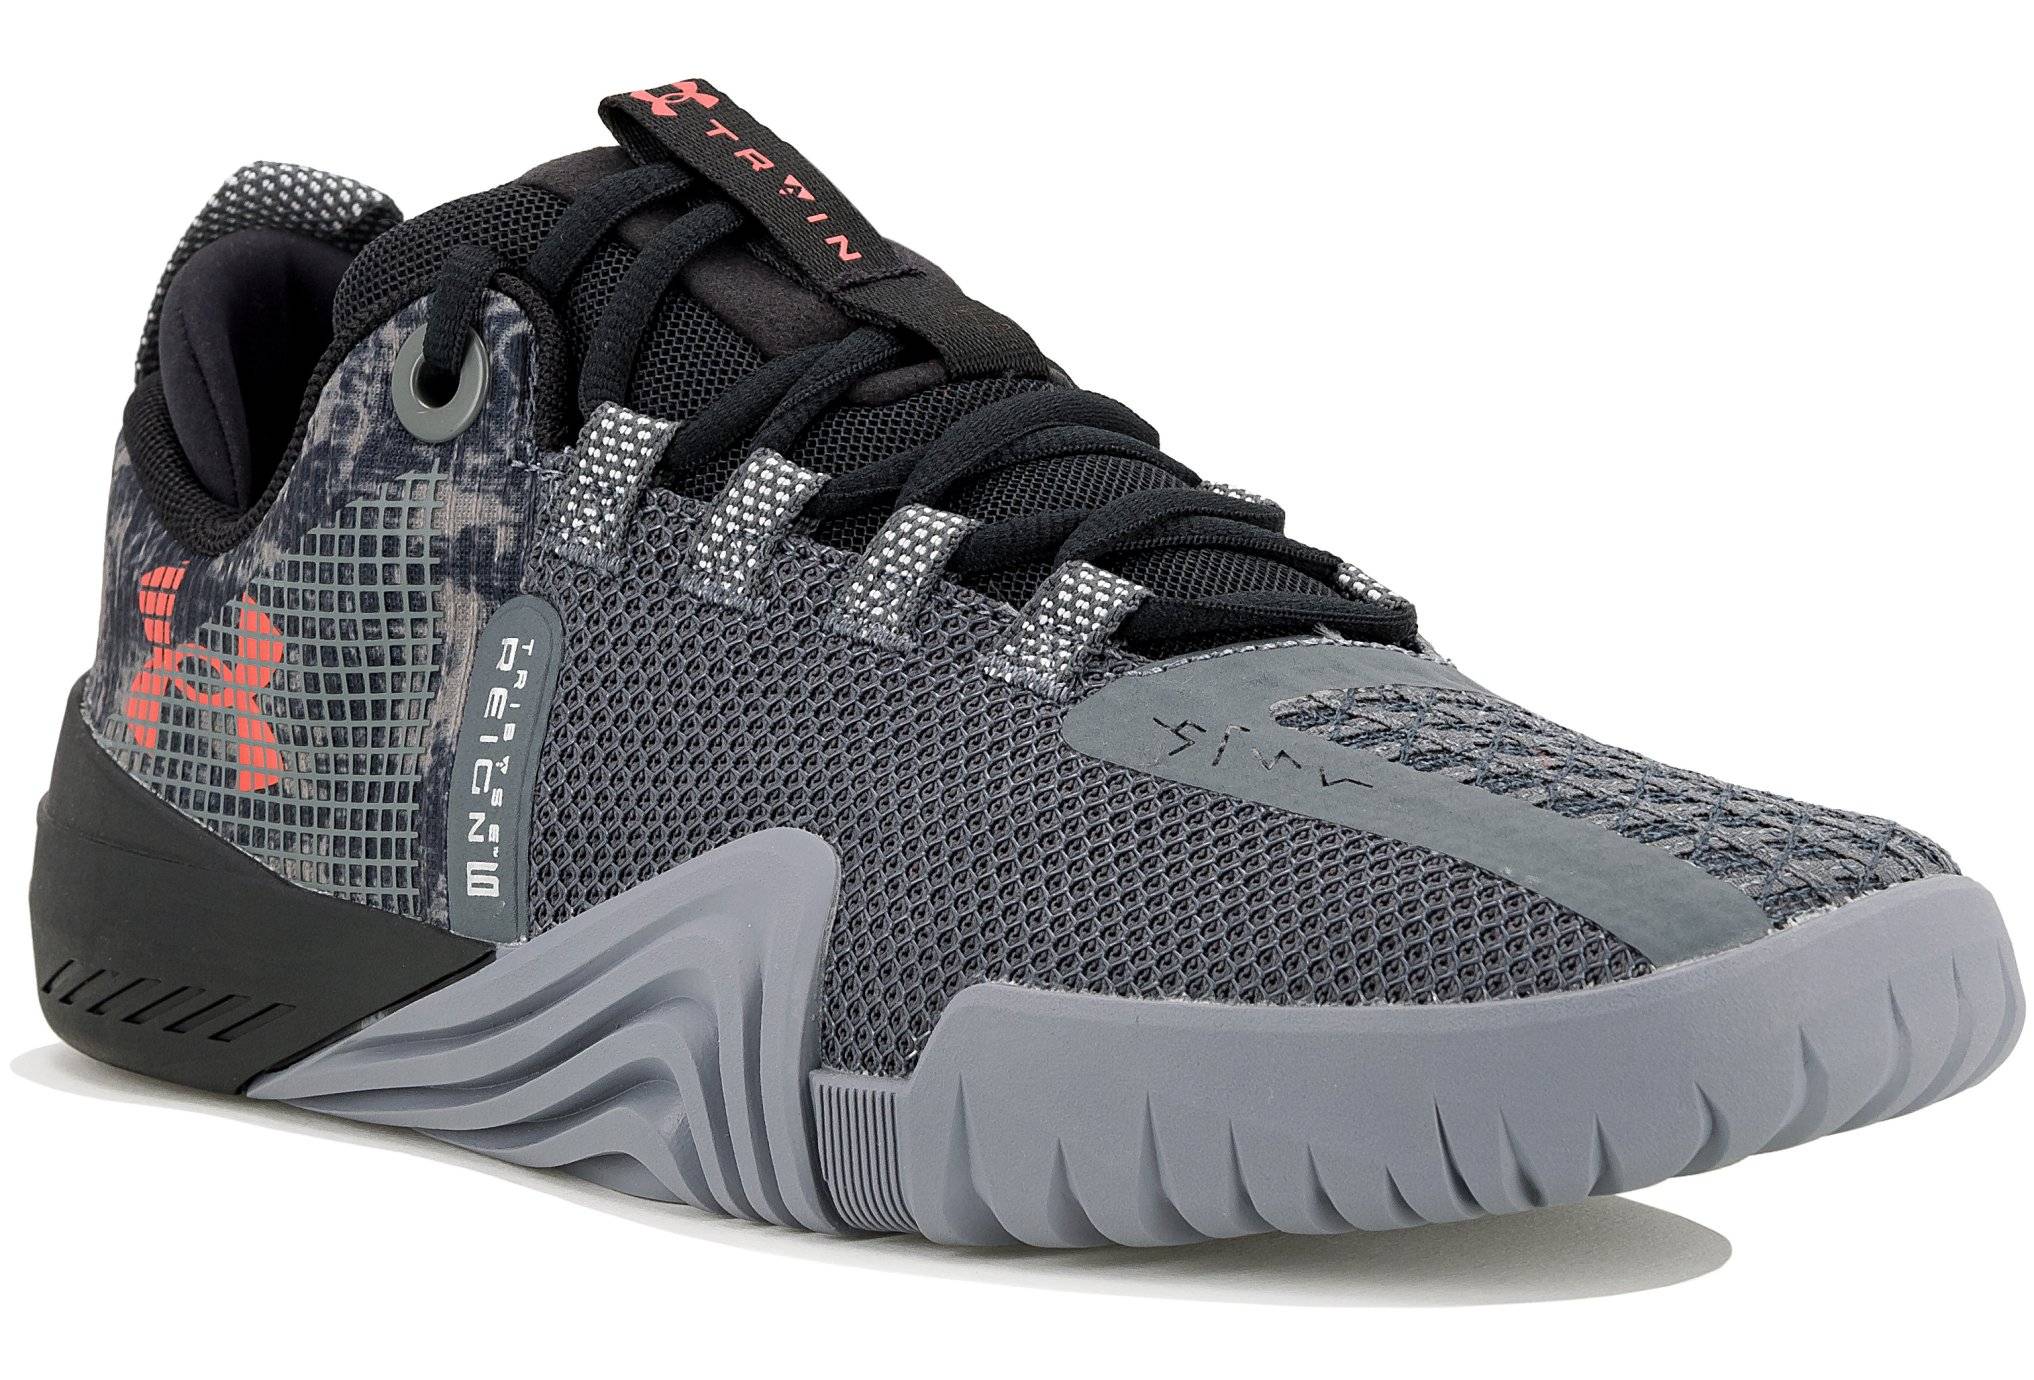 Under Armour TriBase Reign 6 M 